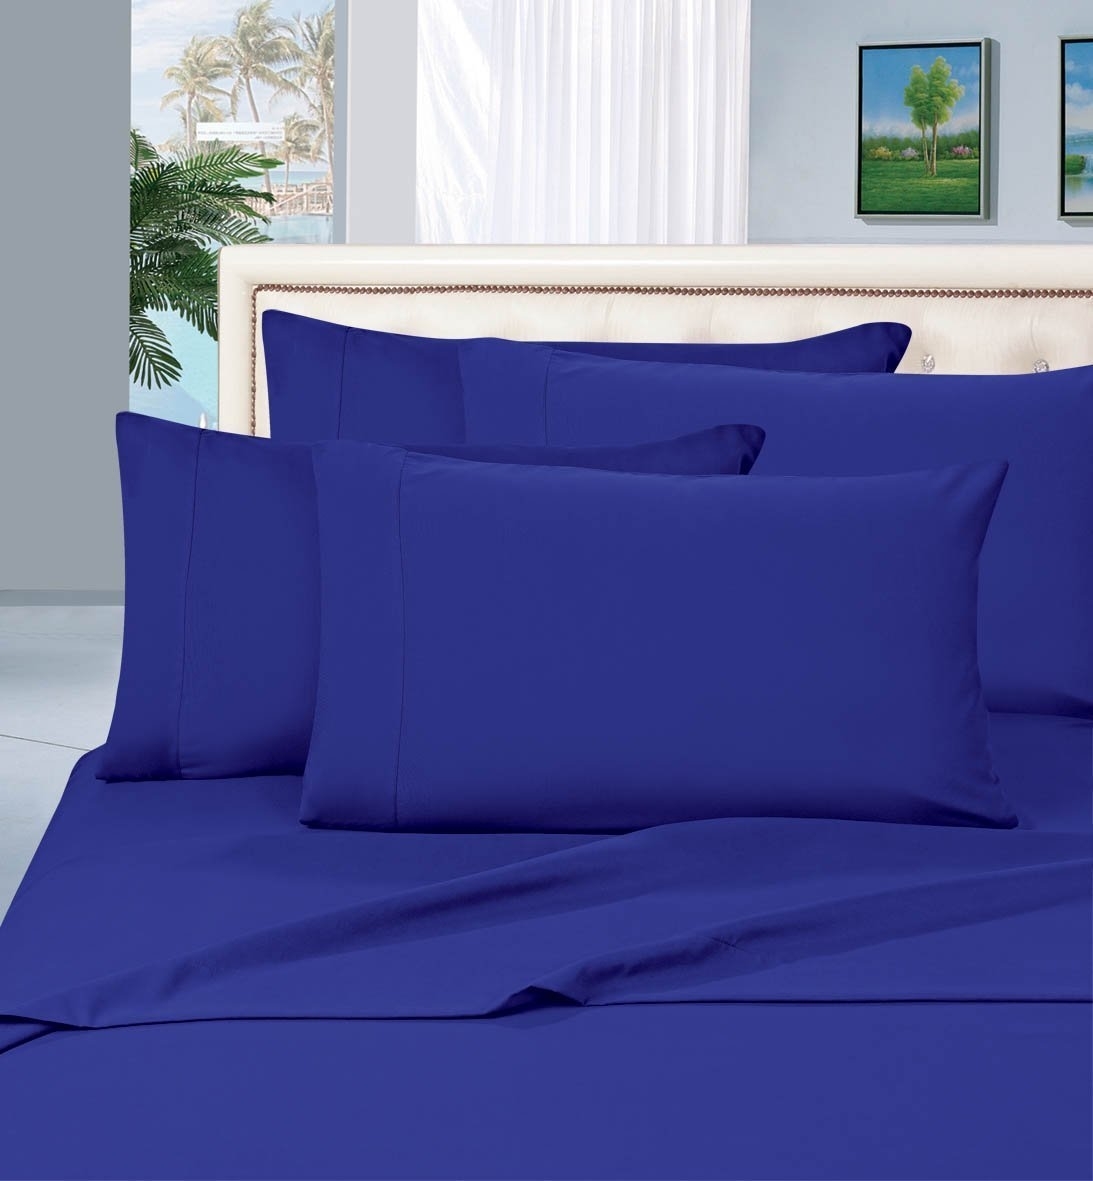 Elegant Comfort 1500 Series Wrinkle Resistant Egyptian Quality Hypoallergenic Ultra Soft Luxury 4-piece Bed Sheet Set, Queen, Royal Blue